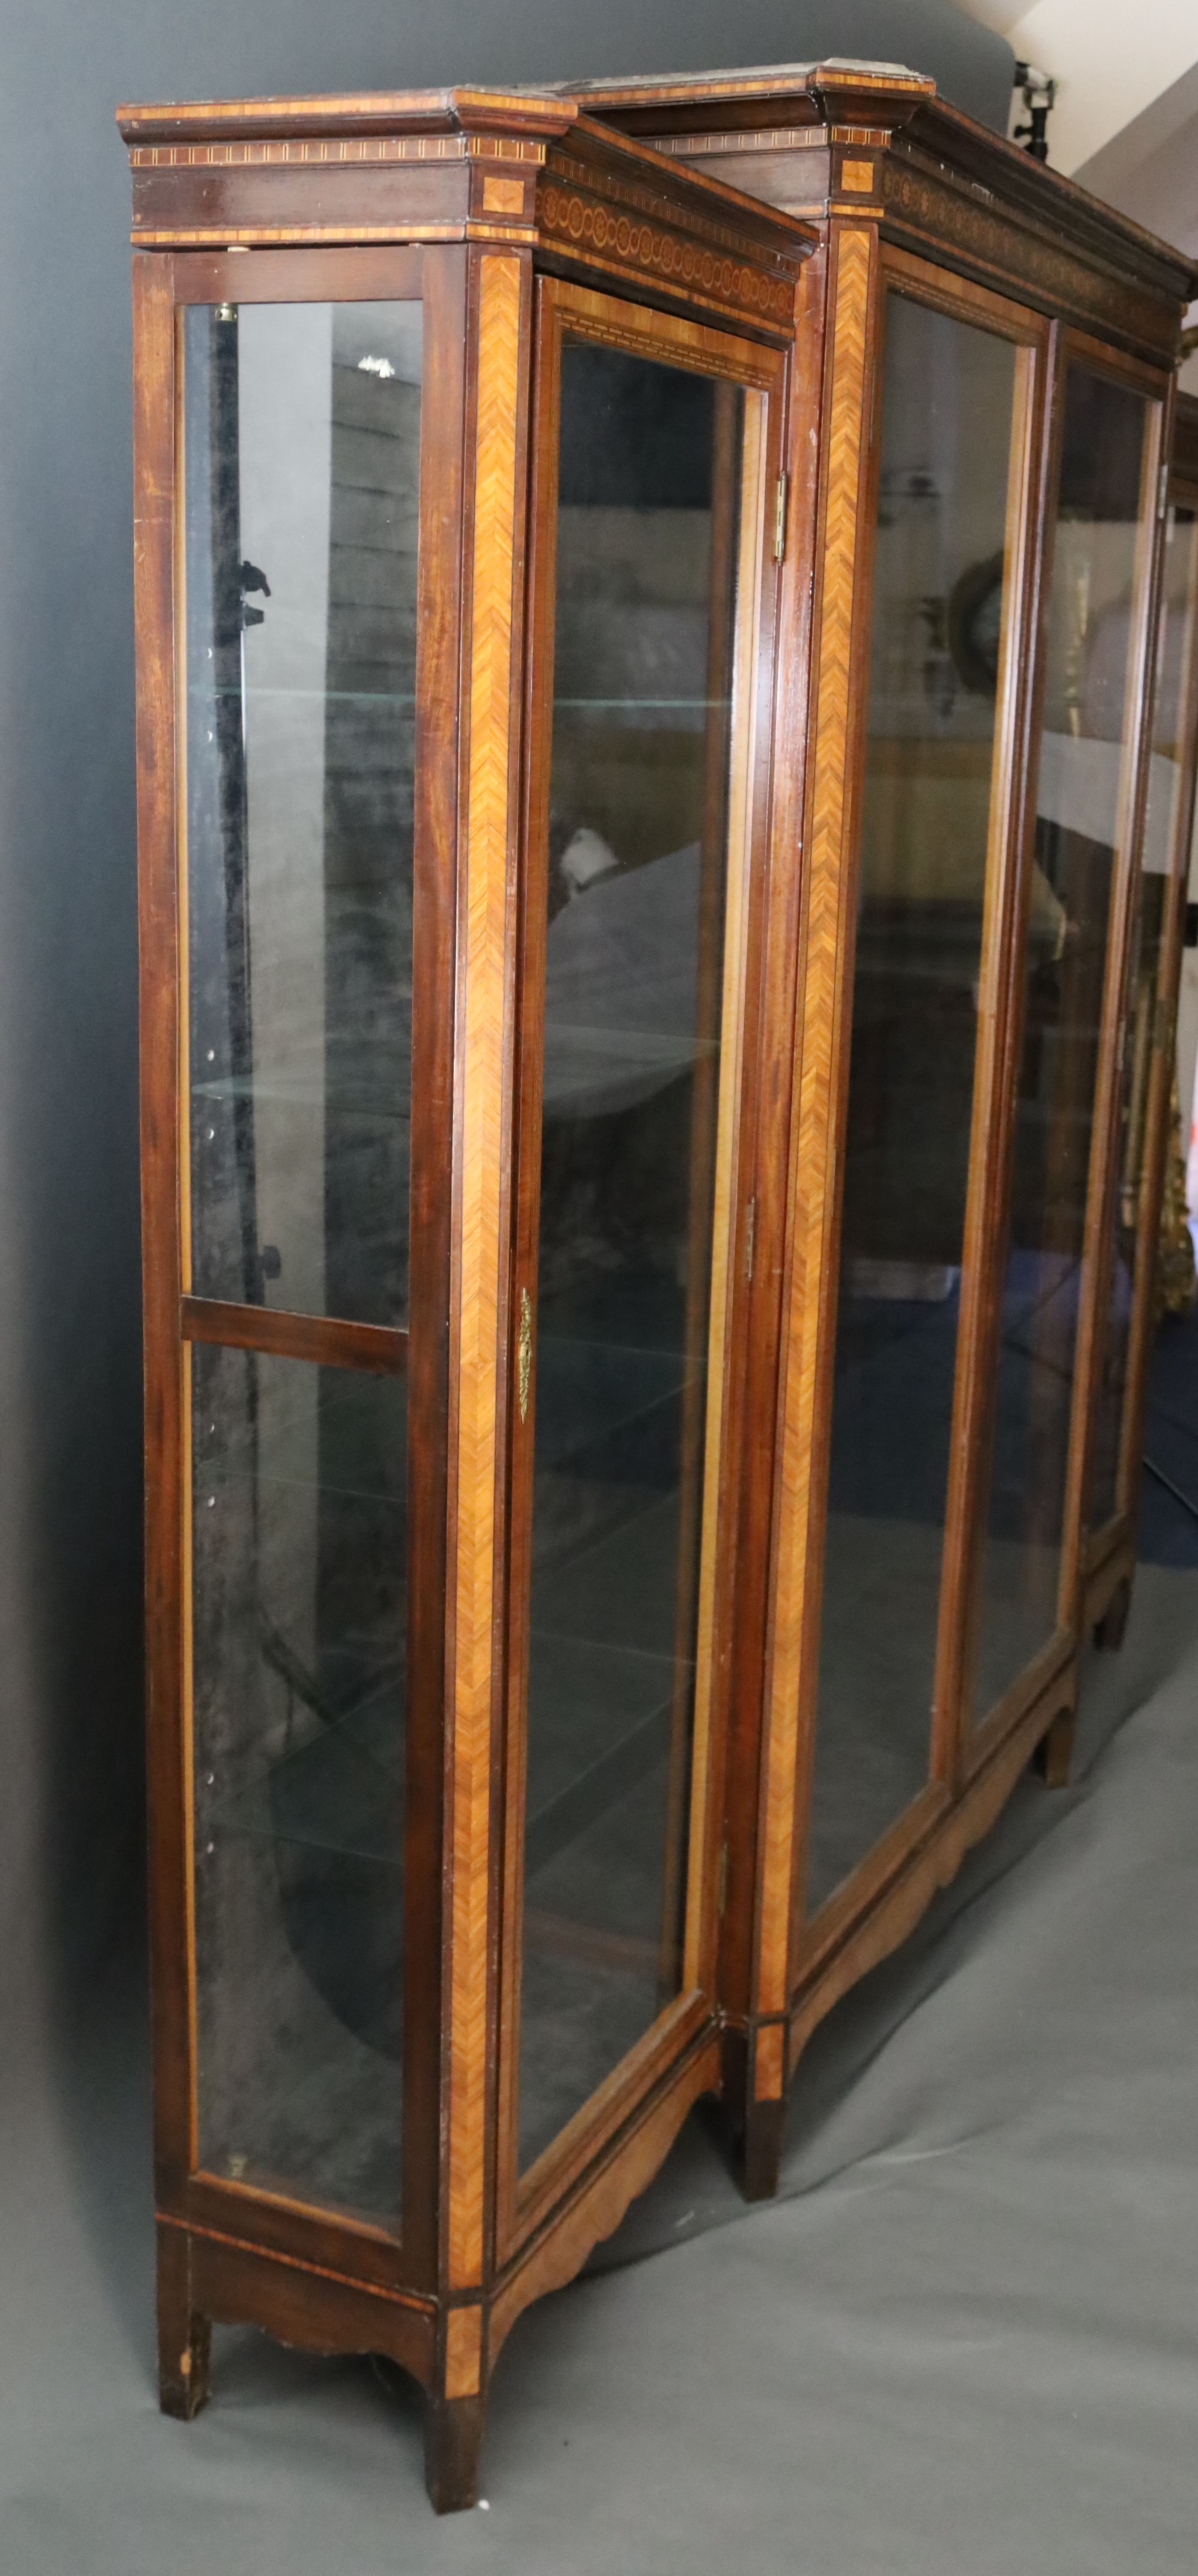 A large 19th century French Louis Philippe period kingwood and marquetry vitrine, W.8ft 4in. D.1ft 5in. H.7ft 4in.